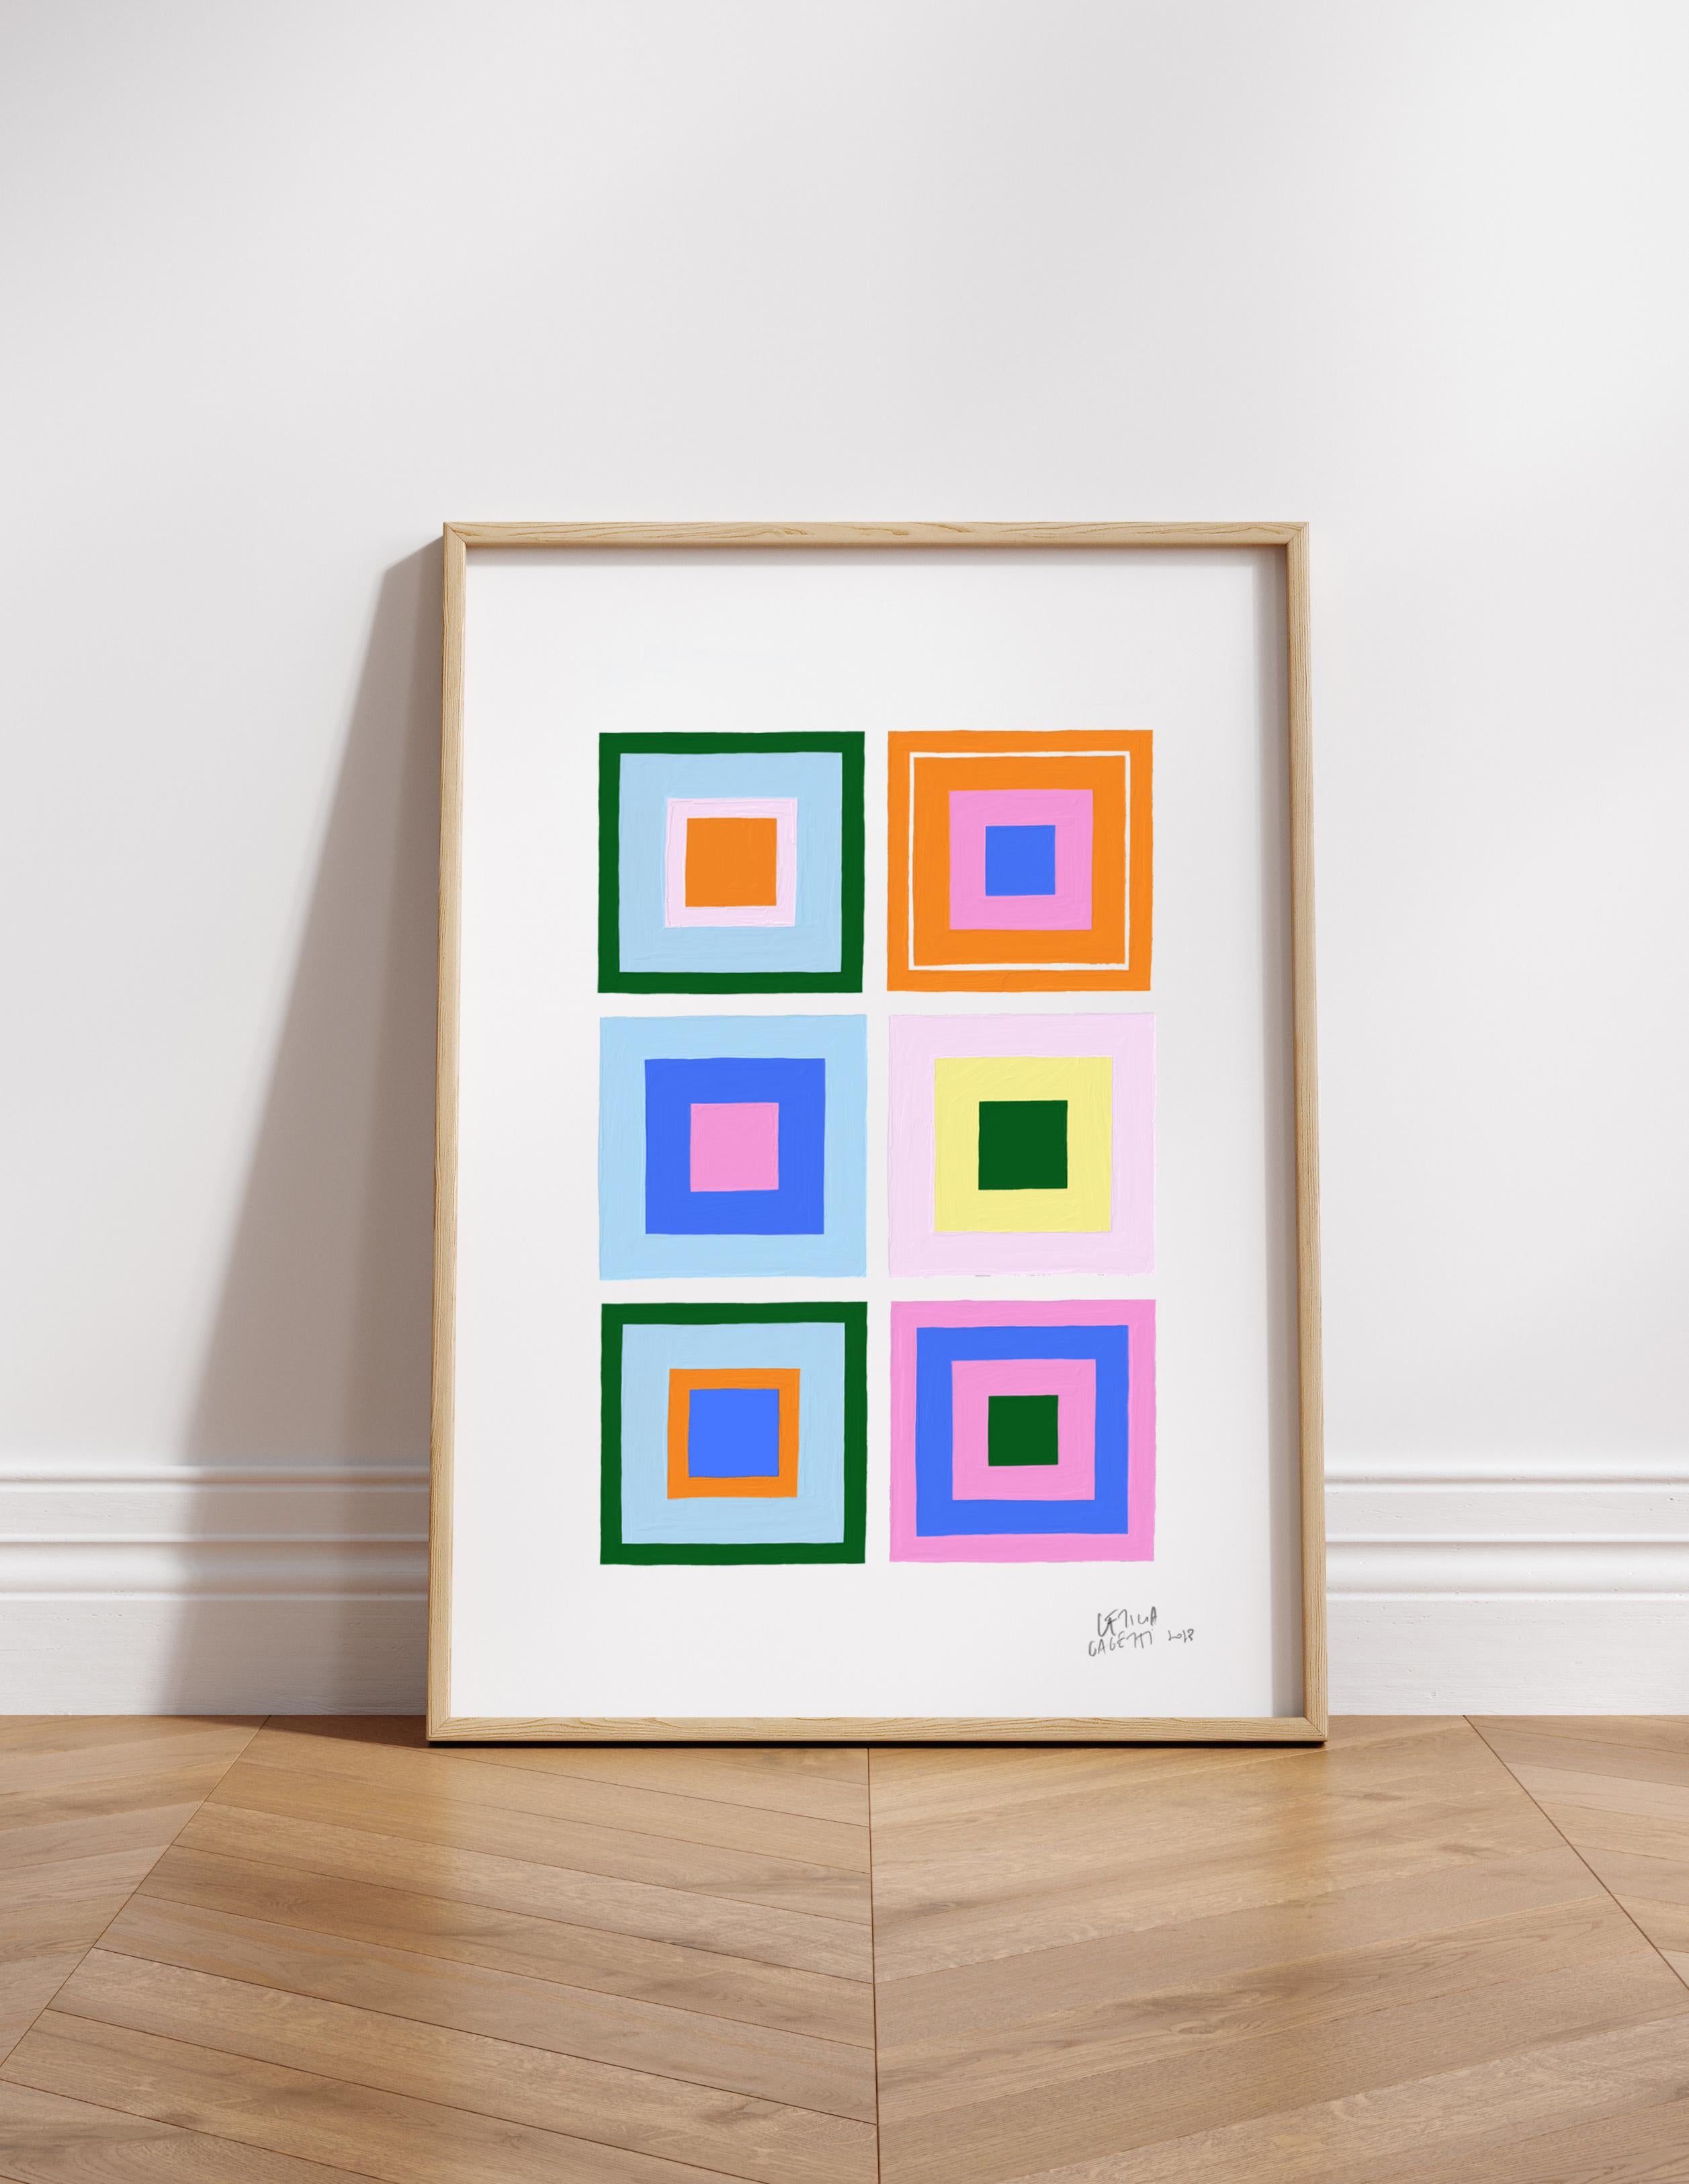 Abstract art print by Leticia Gagetti, printed on 260g high-quality paper with a matte finish that ensures vivid and saturated colors.

Crafted through giclée printing on museum-quality paper, this fine art poster utilizes archival inks to capture